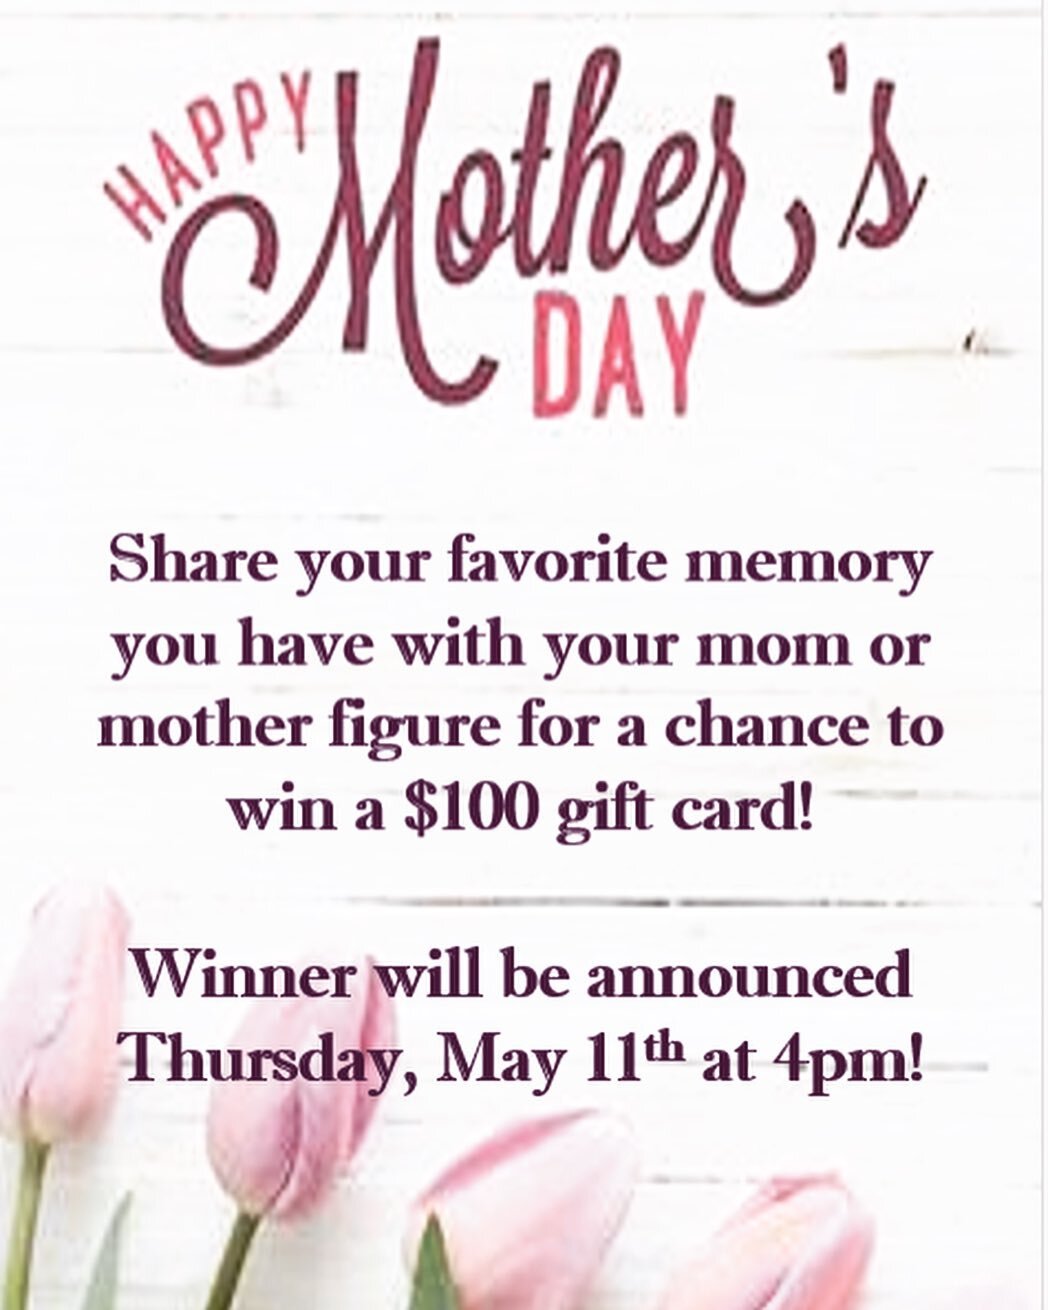 Mother&rsquo;s Day is around the corner! Come to the first floor lobby and tell us about your favorite memory you have with your mom or mother figure! Winner will get a $100 gift card!